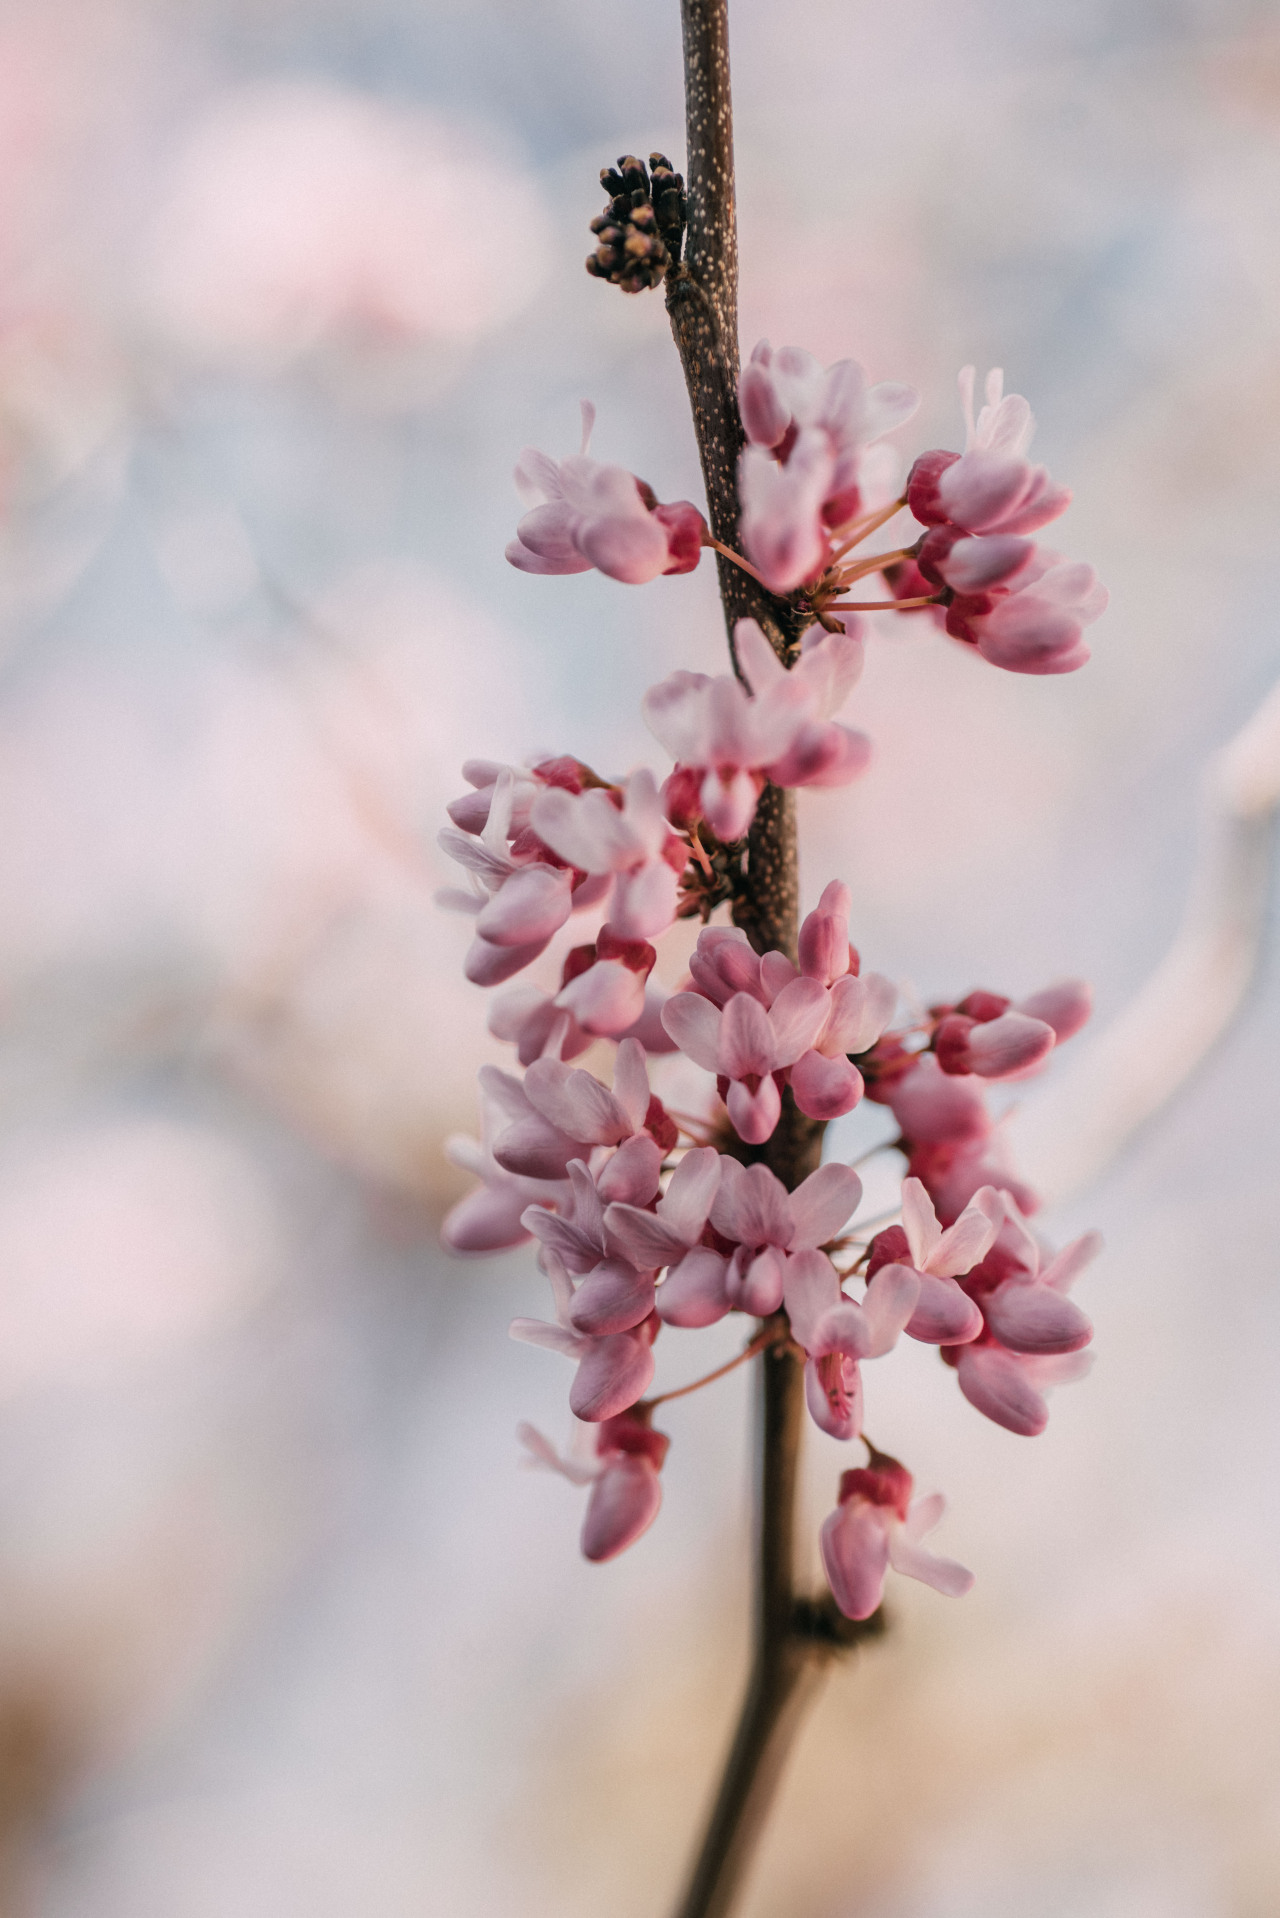 redbud blossoms #red bud tree #uncropped nature#nature#original photography#original photographer #photographers on tumblr #lensblr #original photography blog #photoblog#vertical#vertical nature#aesthetic